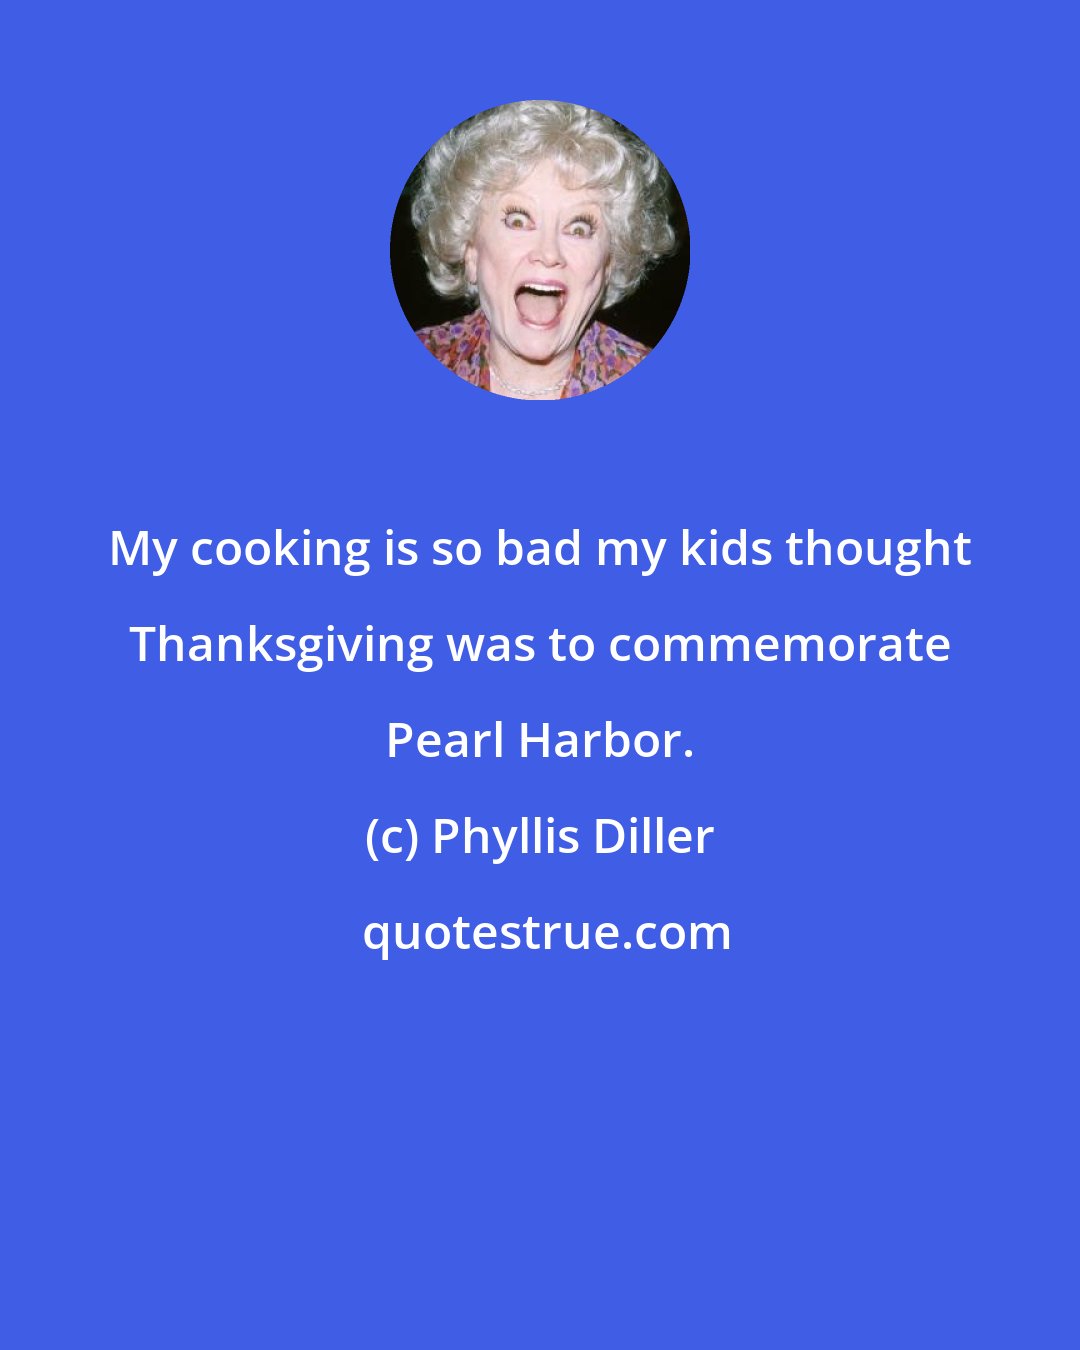 Phyllis Diller: My cooking is so bad my kids thought Thanksgiving was to commemorate Pearl Harbor.